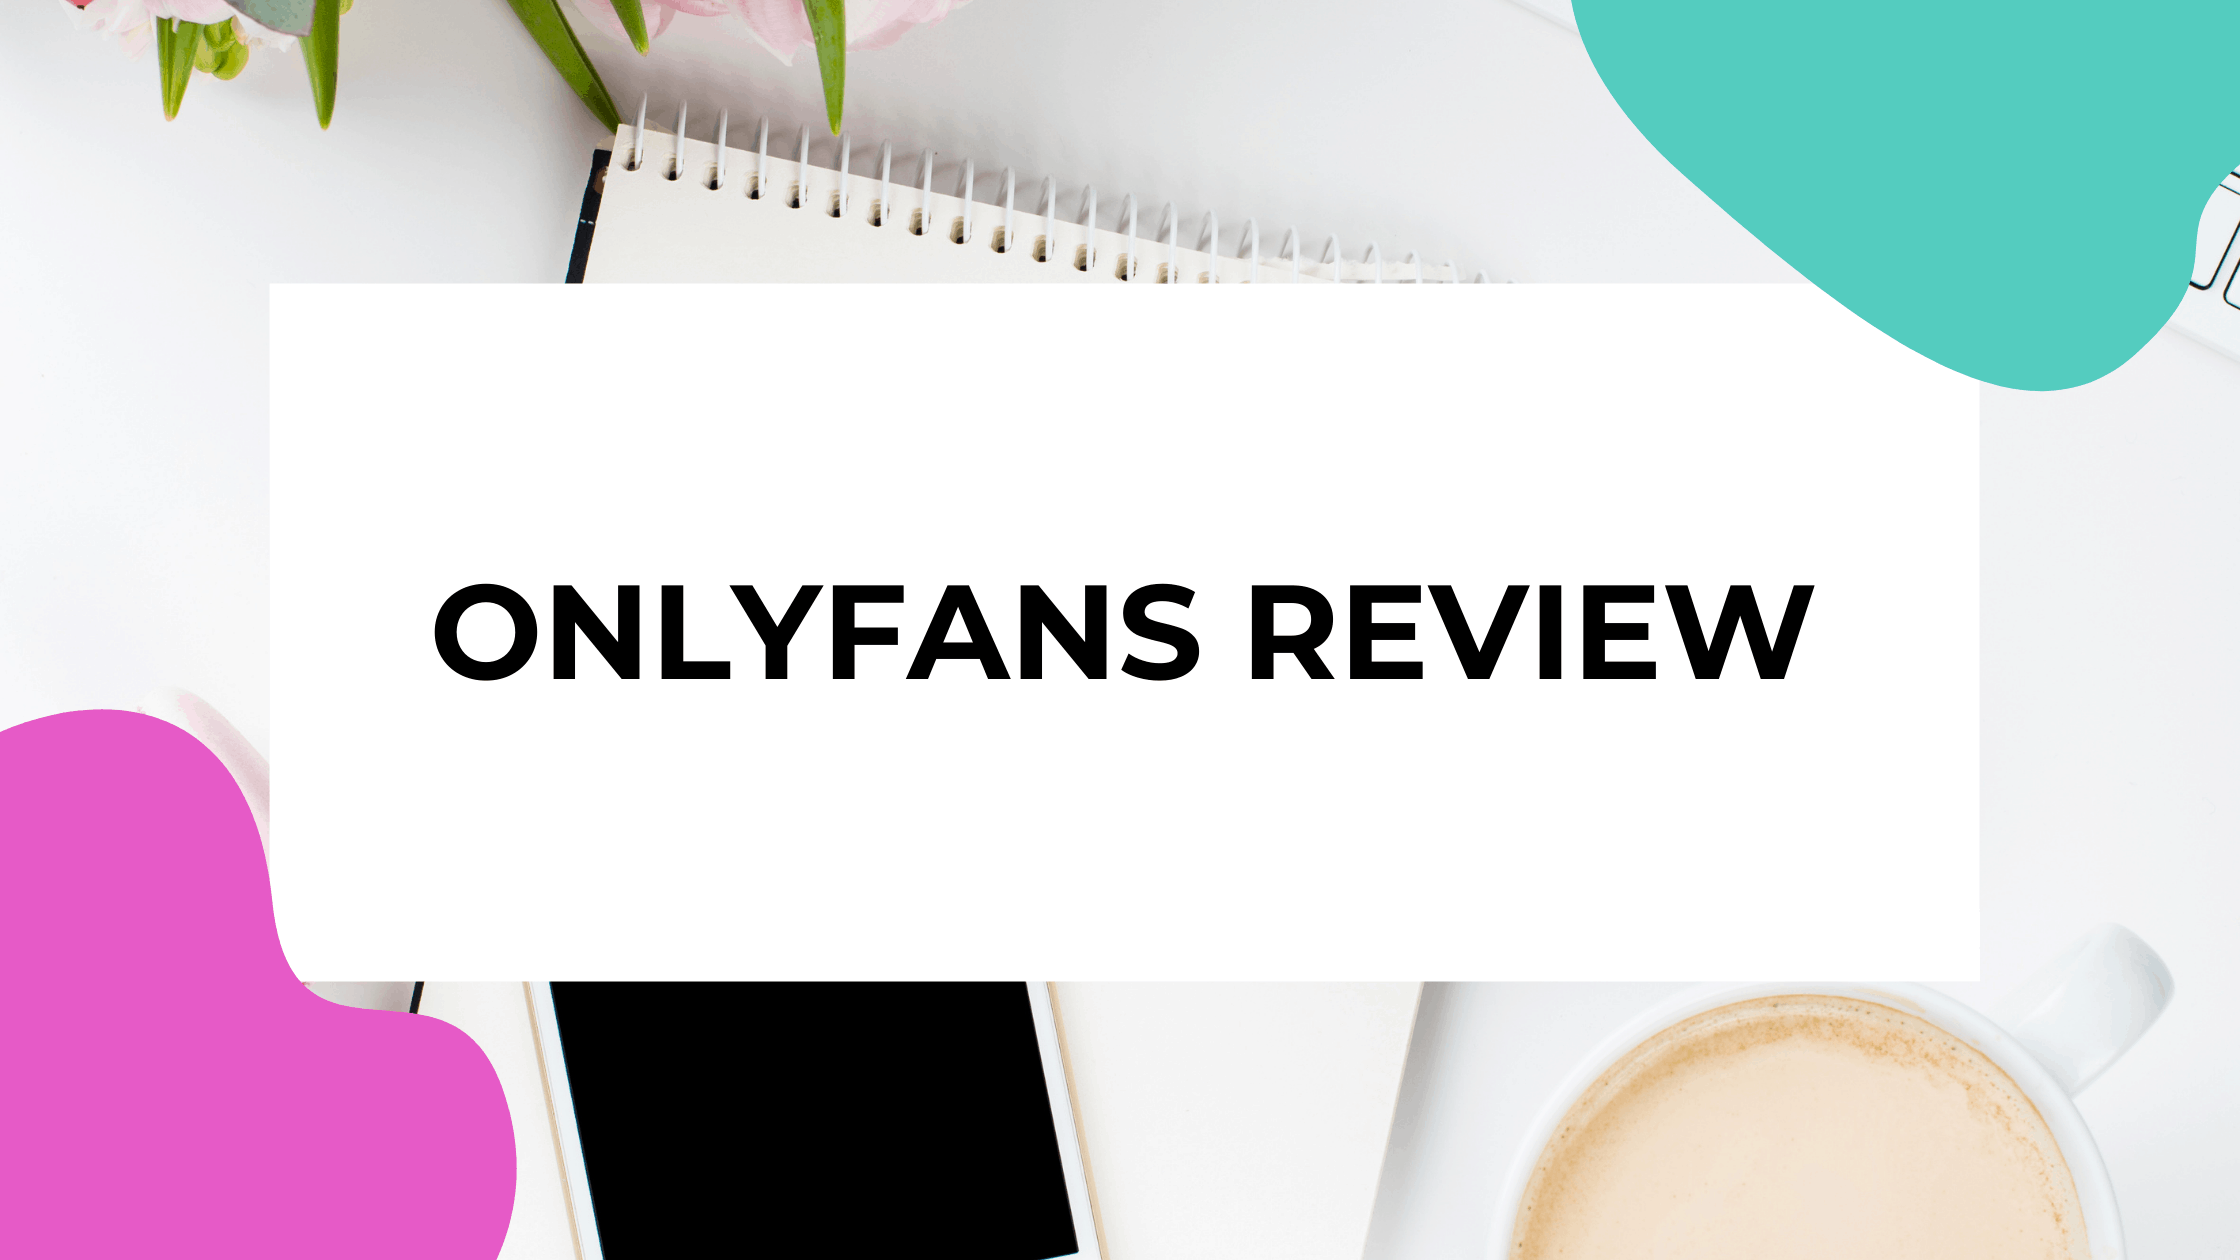 Only fans reviewd